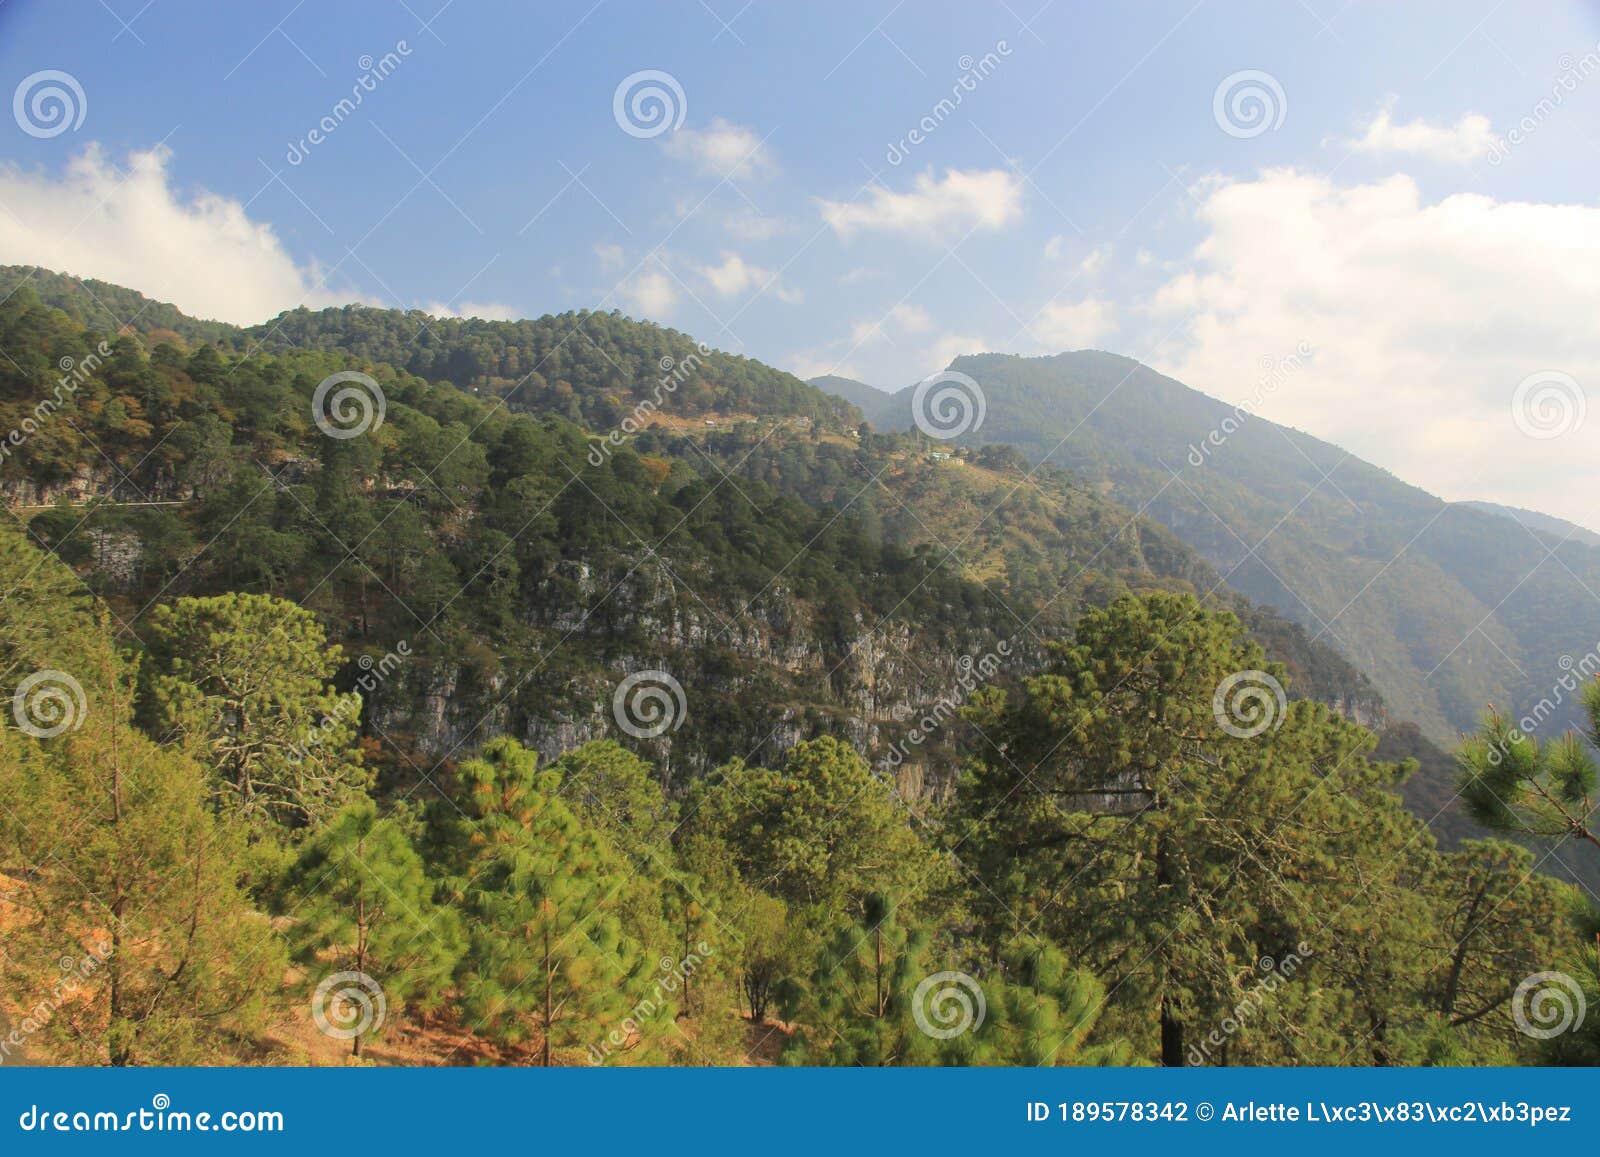 mountain and forest landscape inside los marmoles natural park in zimapan hidalgo mexico